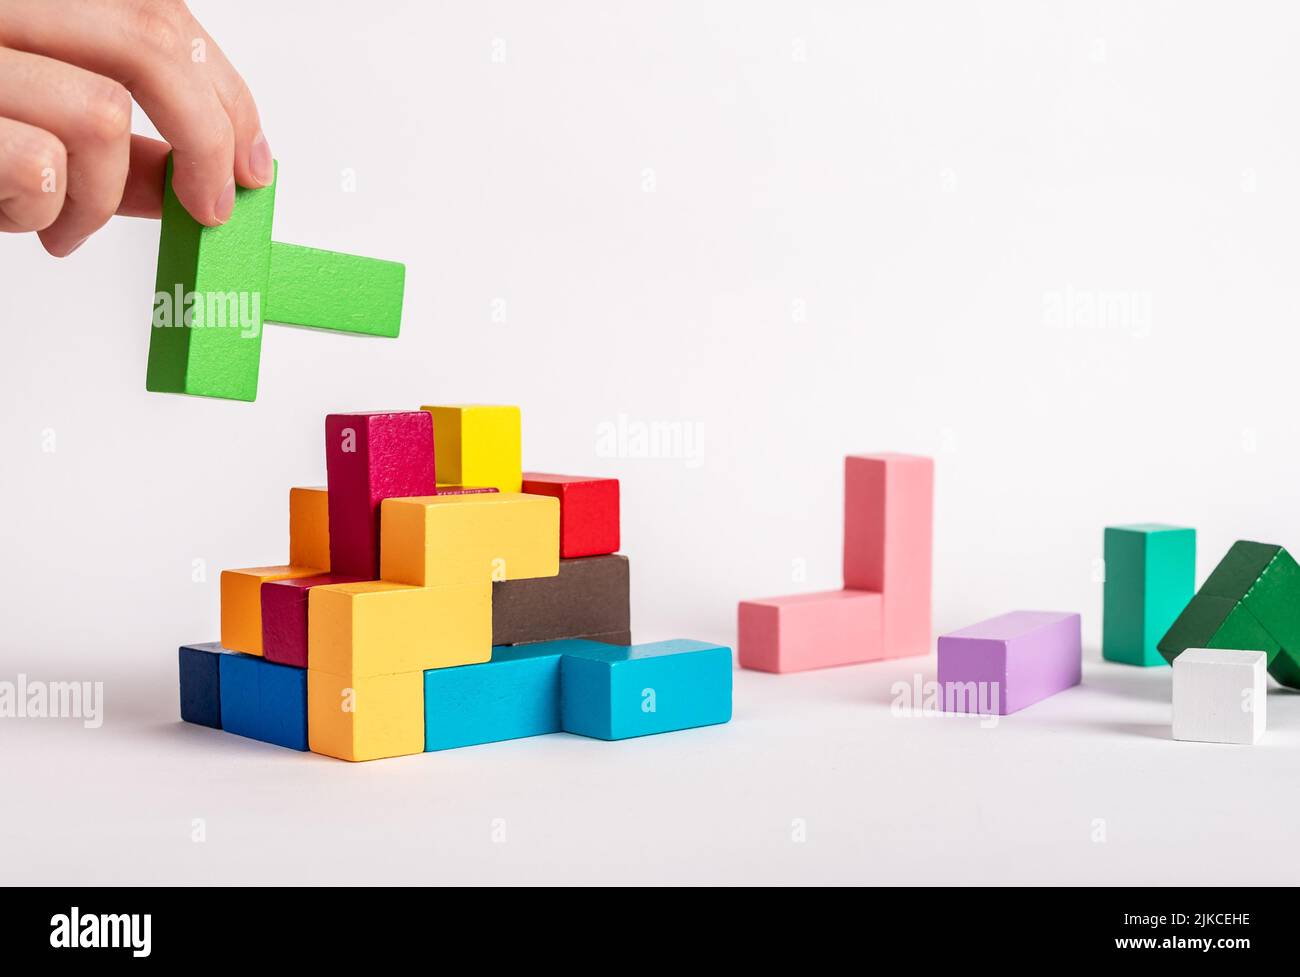 Hand assembling tetris puzzle, searching appropriate place for wooden block. Construction, formation concept. Finding solution to problem. Logical thinking, reasoning strategy development. photo Stock Photo